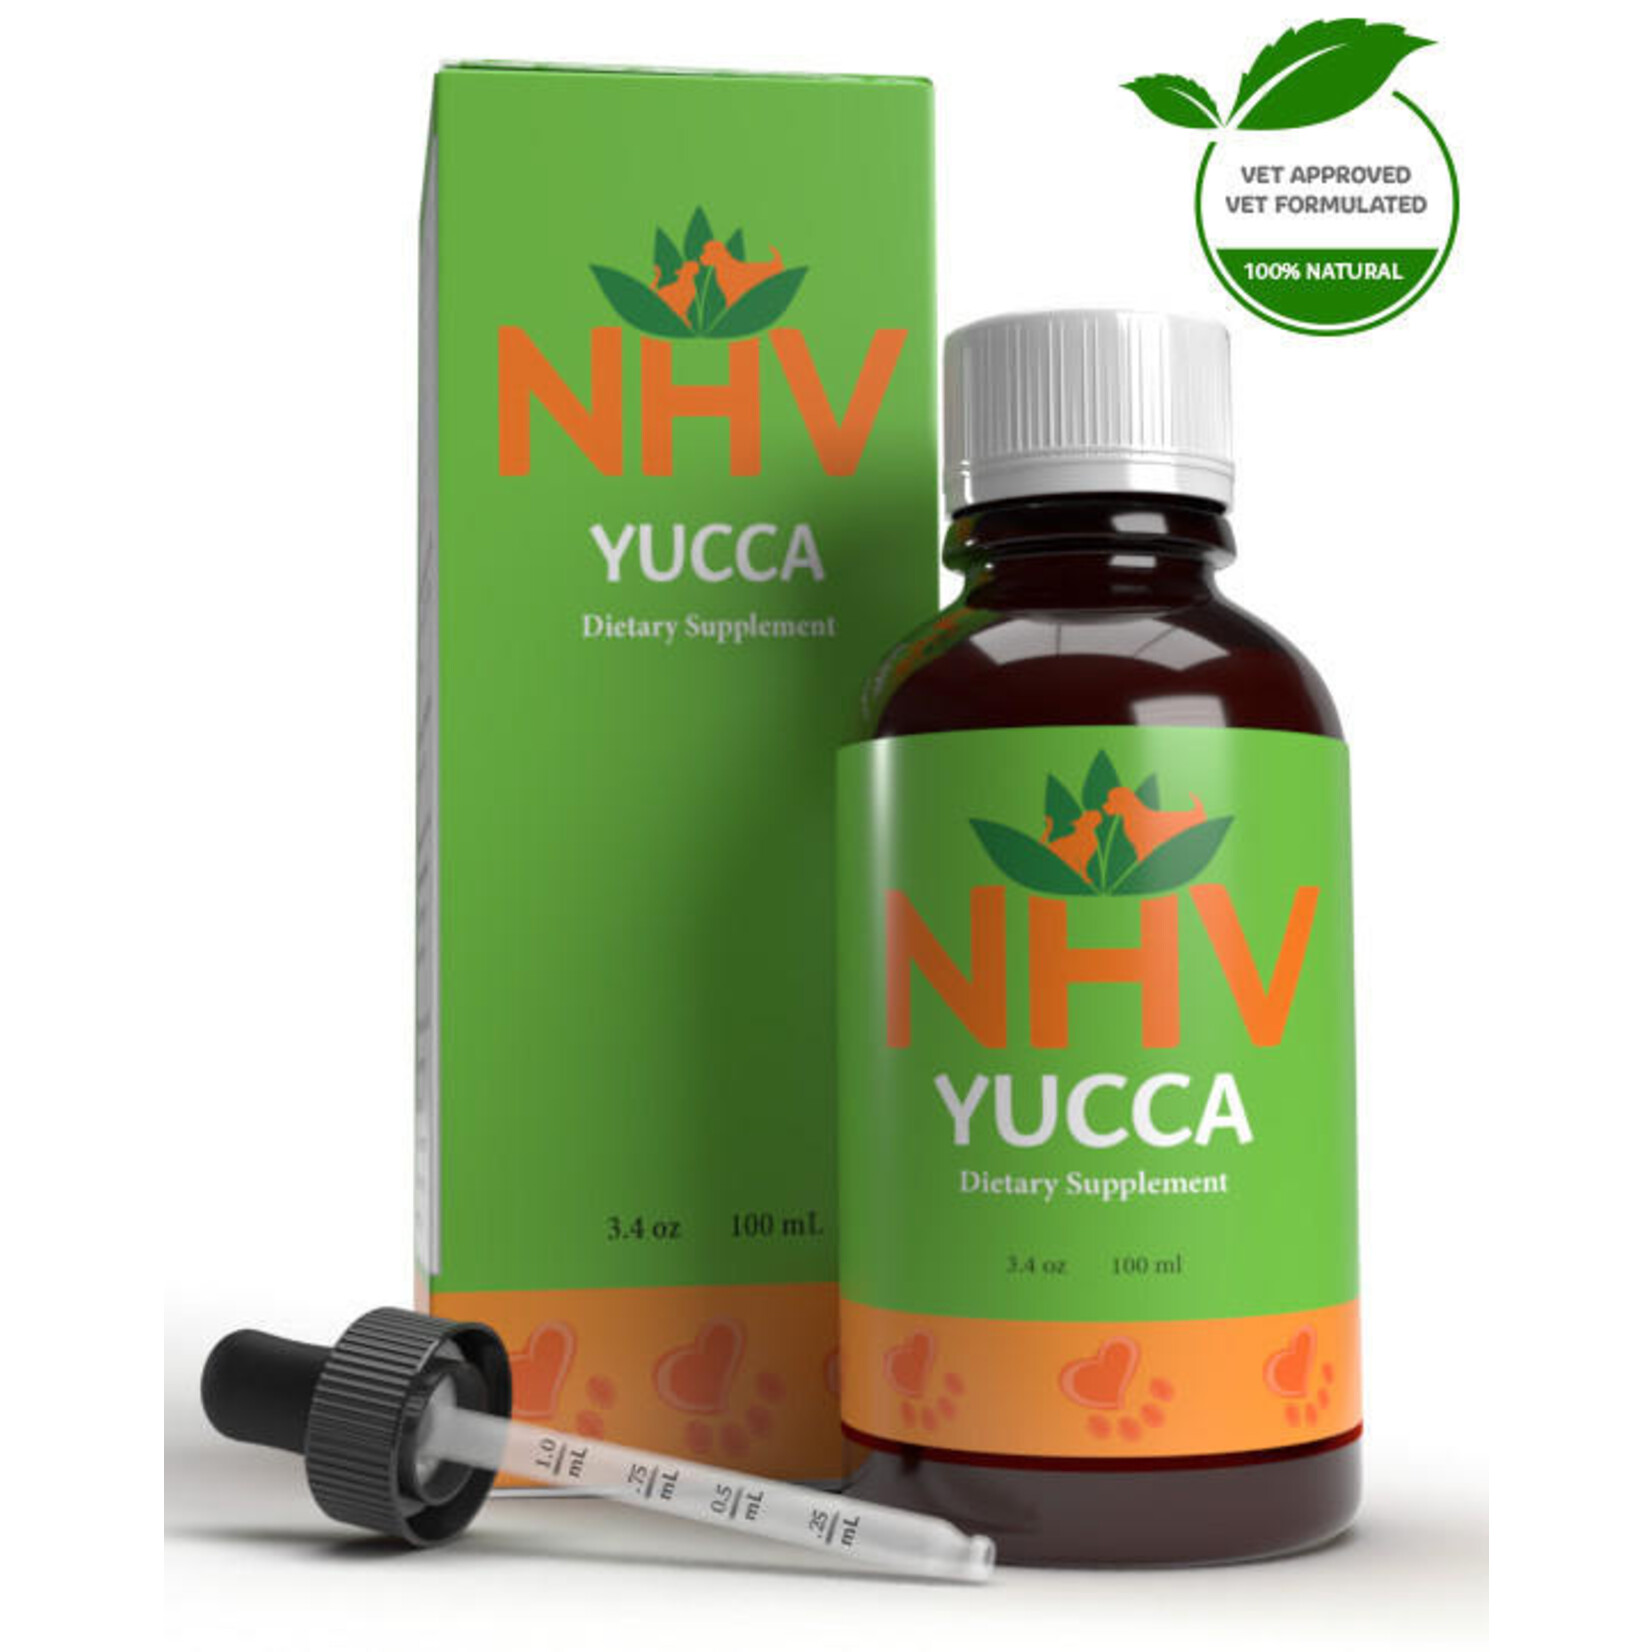 NHV Natural Pet Products NHV YUCCA - Digestive Support, and Dog Appetite Booster for Dogs & Cats IN-STORE ONLY